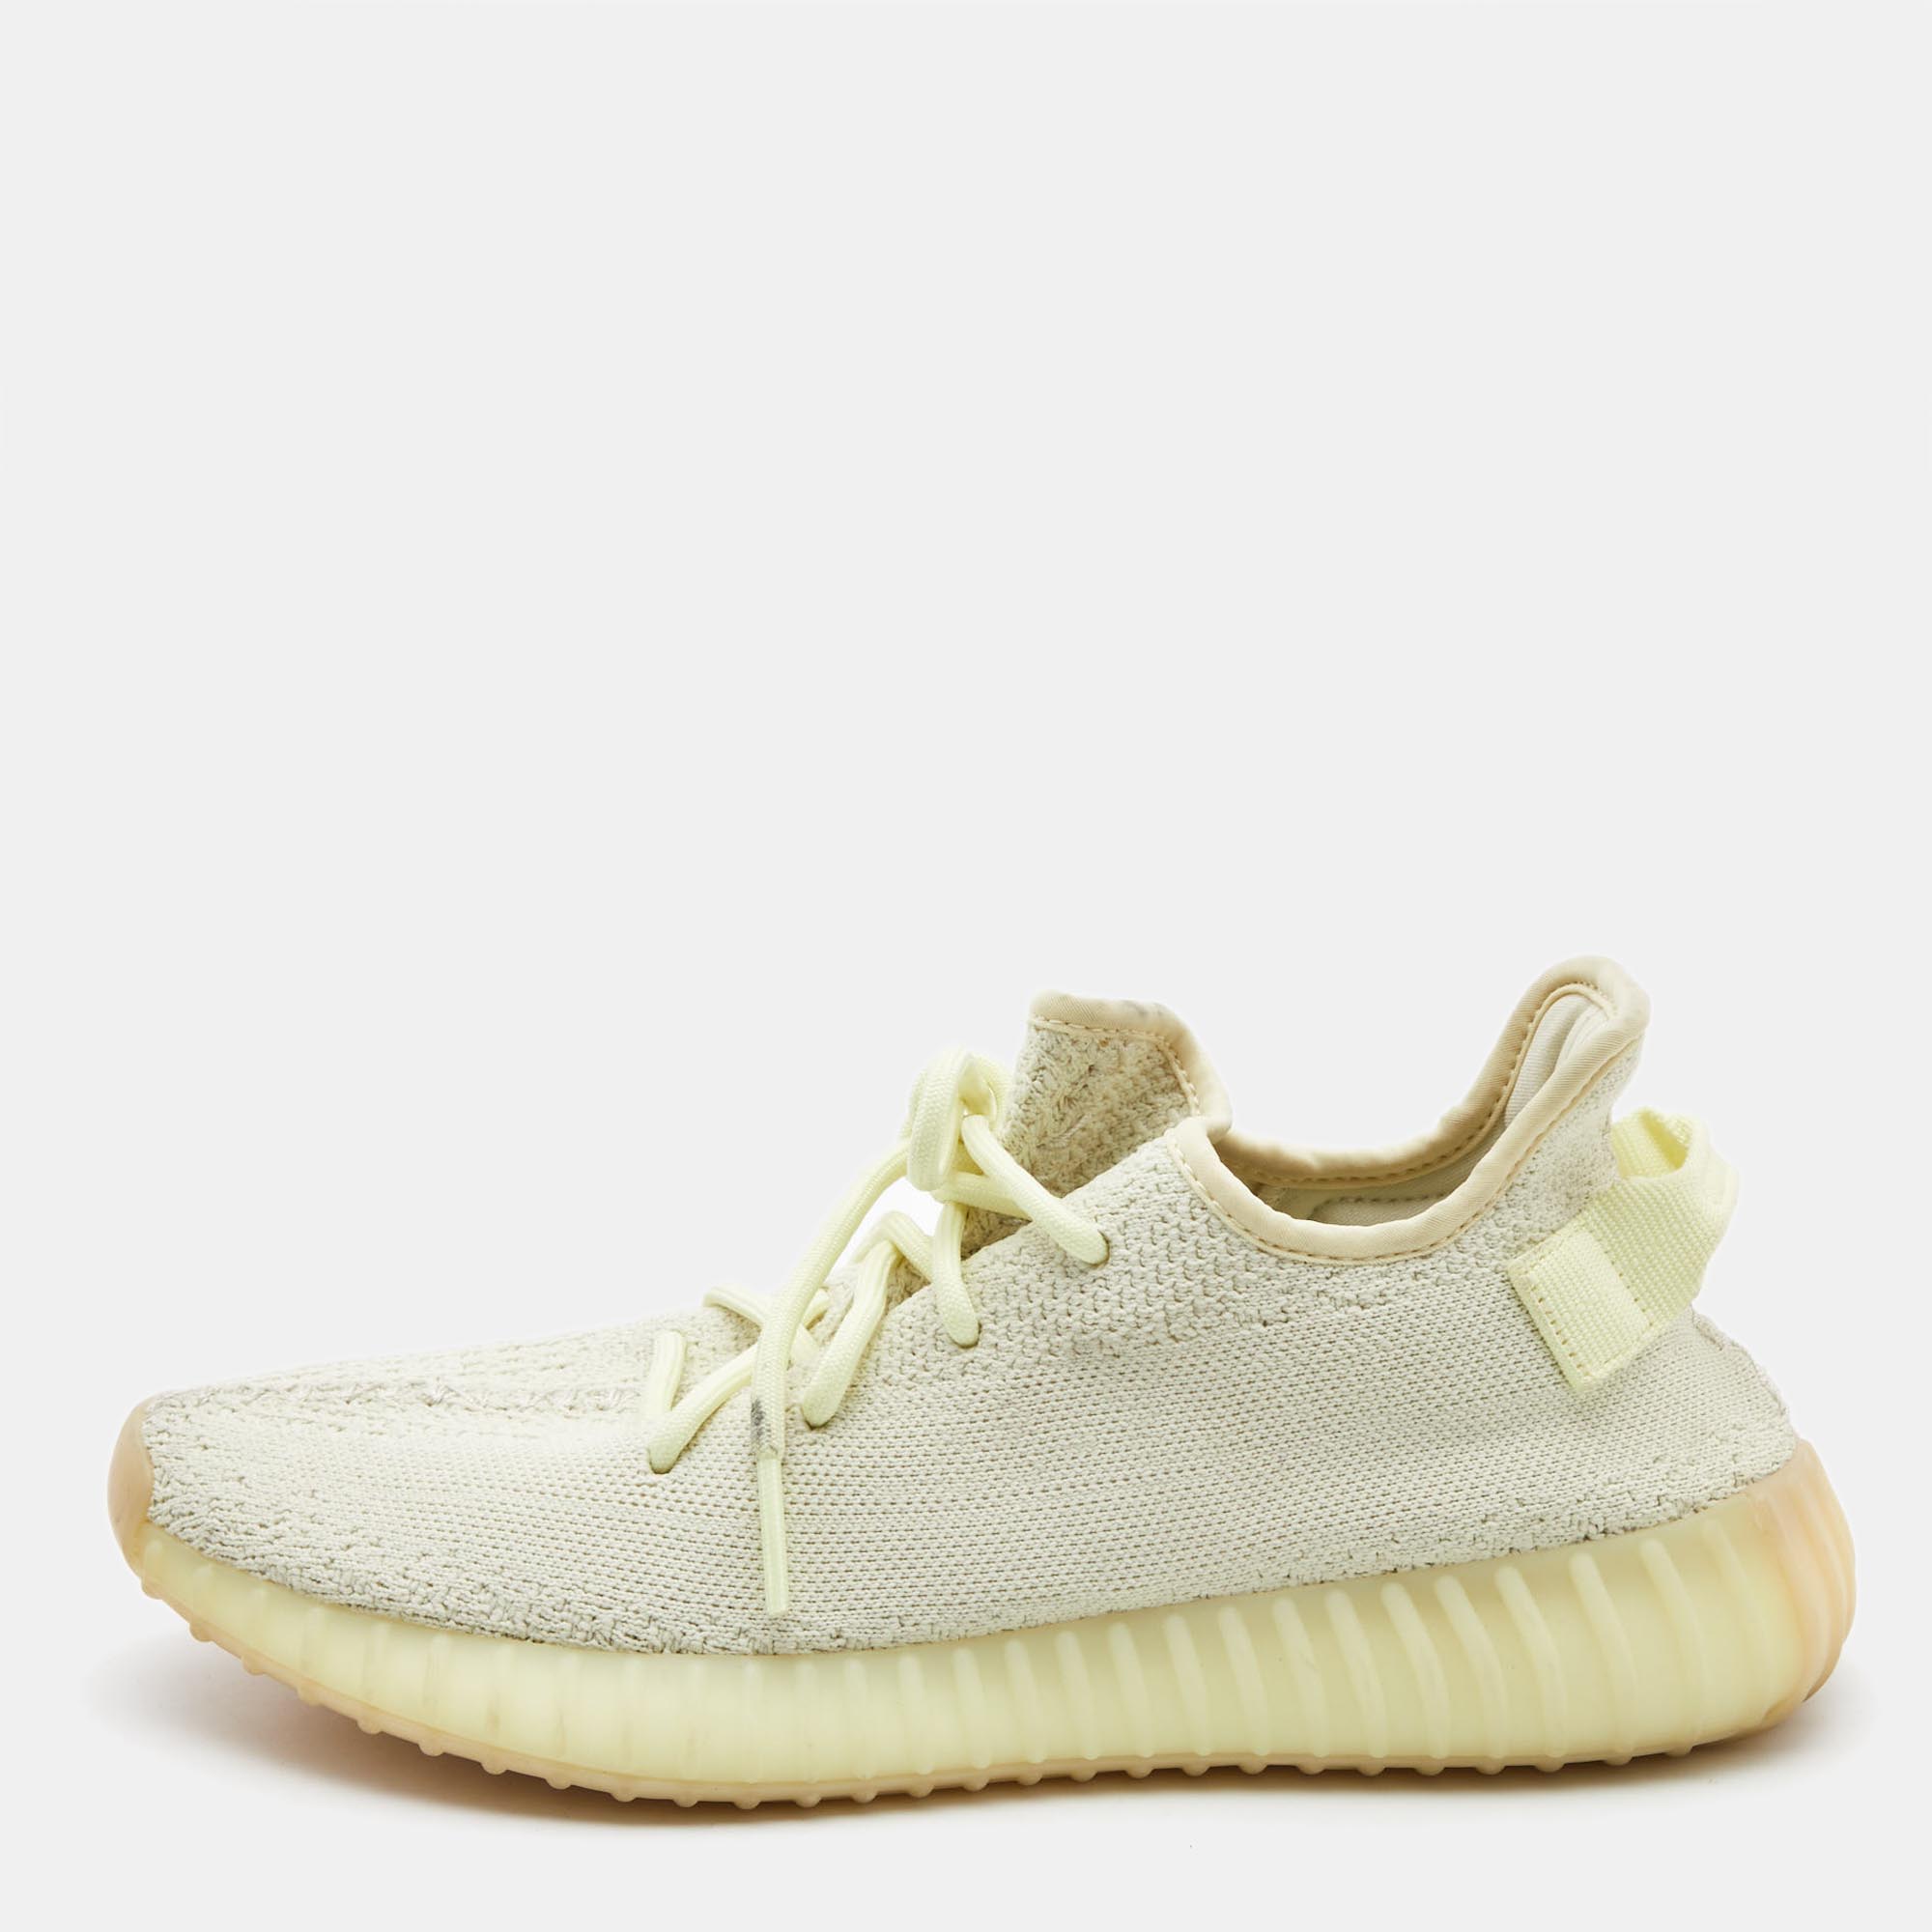 Yeezy X Adidas Light Yellow Knit Fabric Boost 350 V2 Butter Sneakers Size 41 1/3